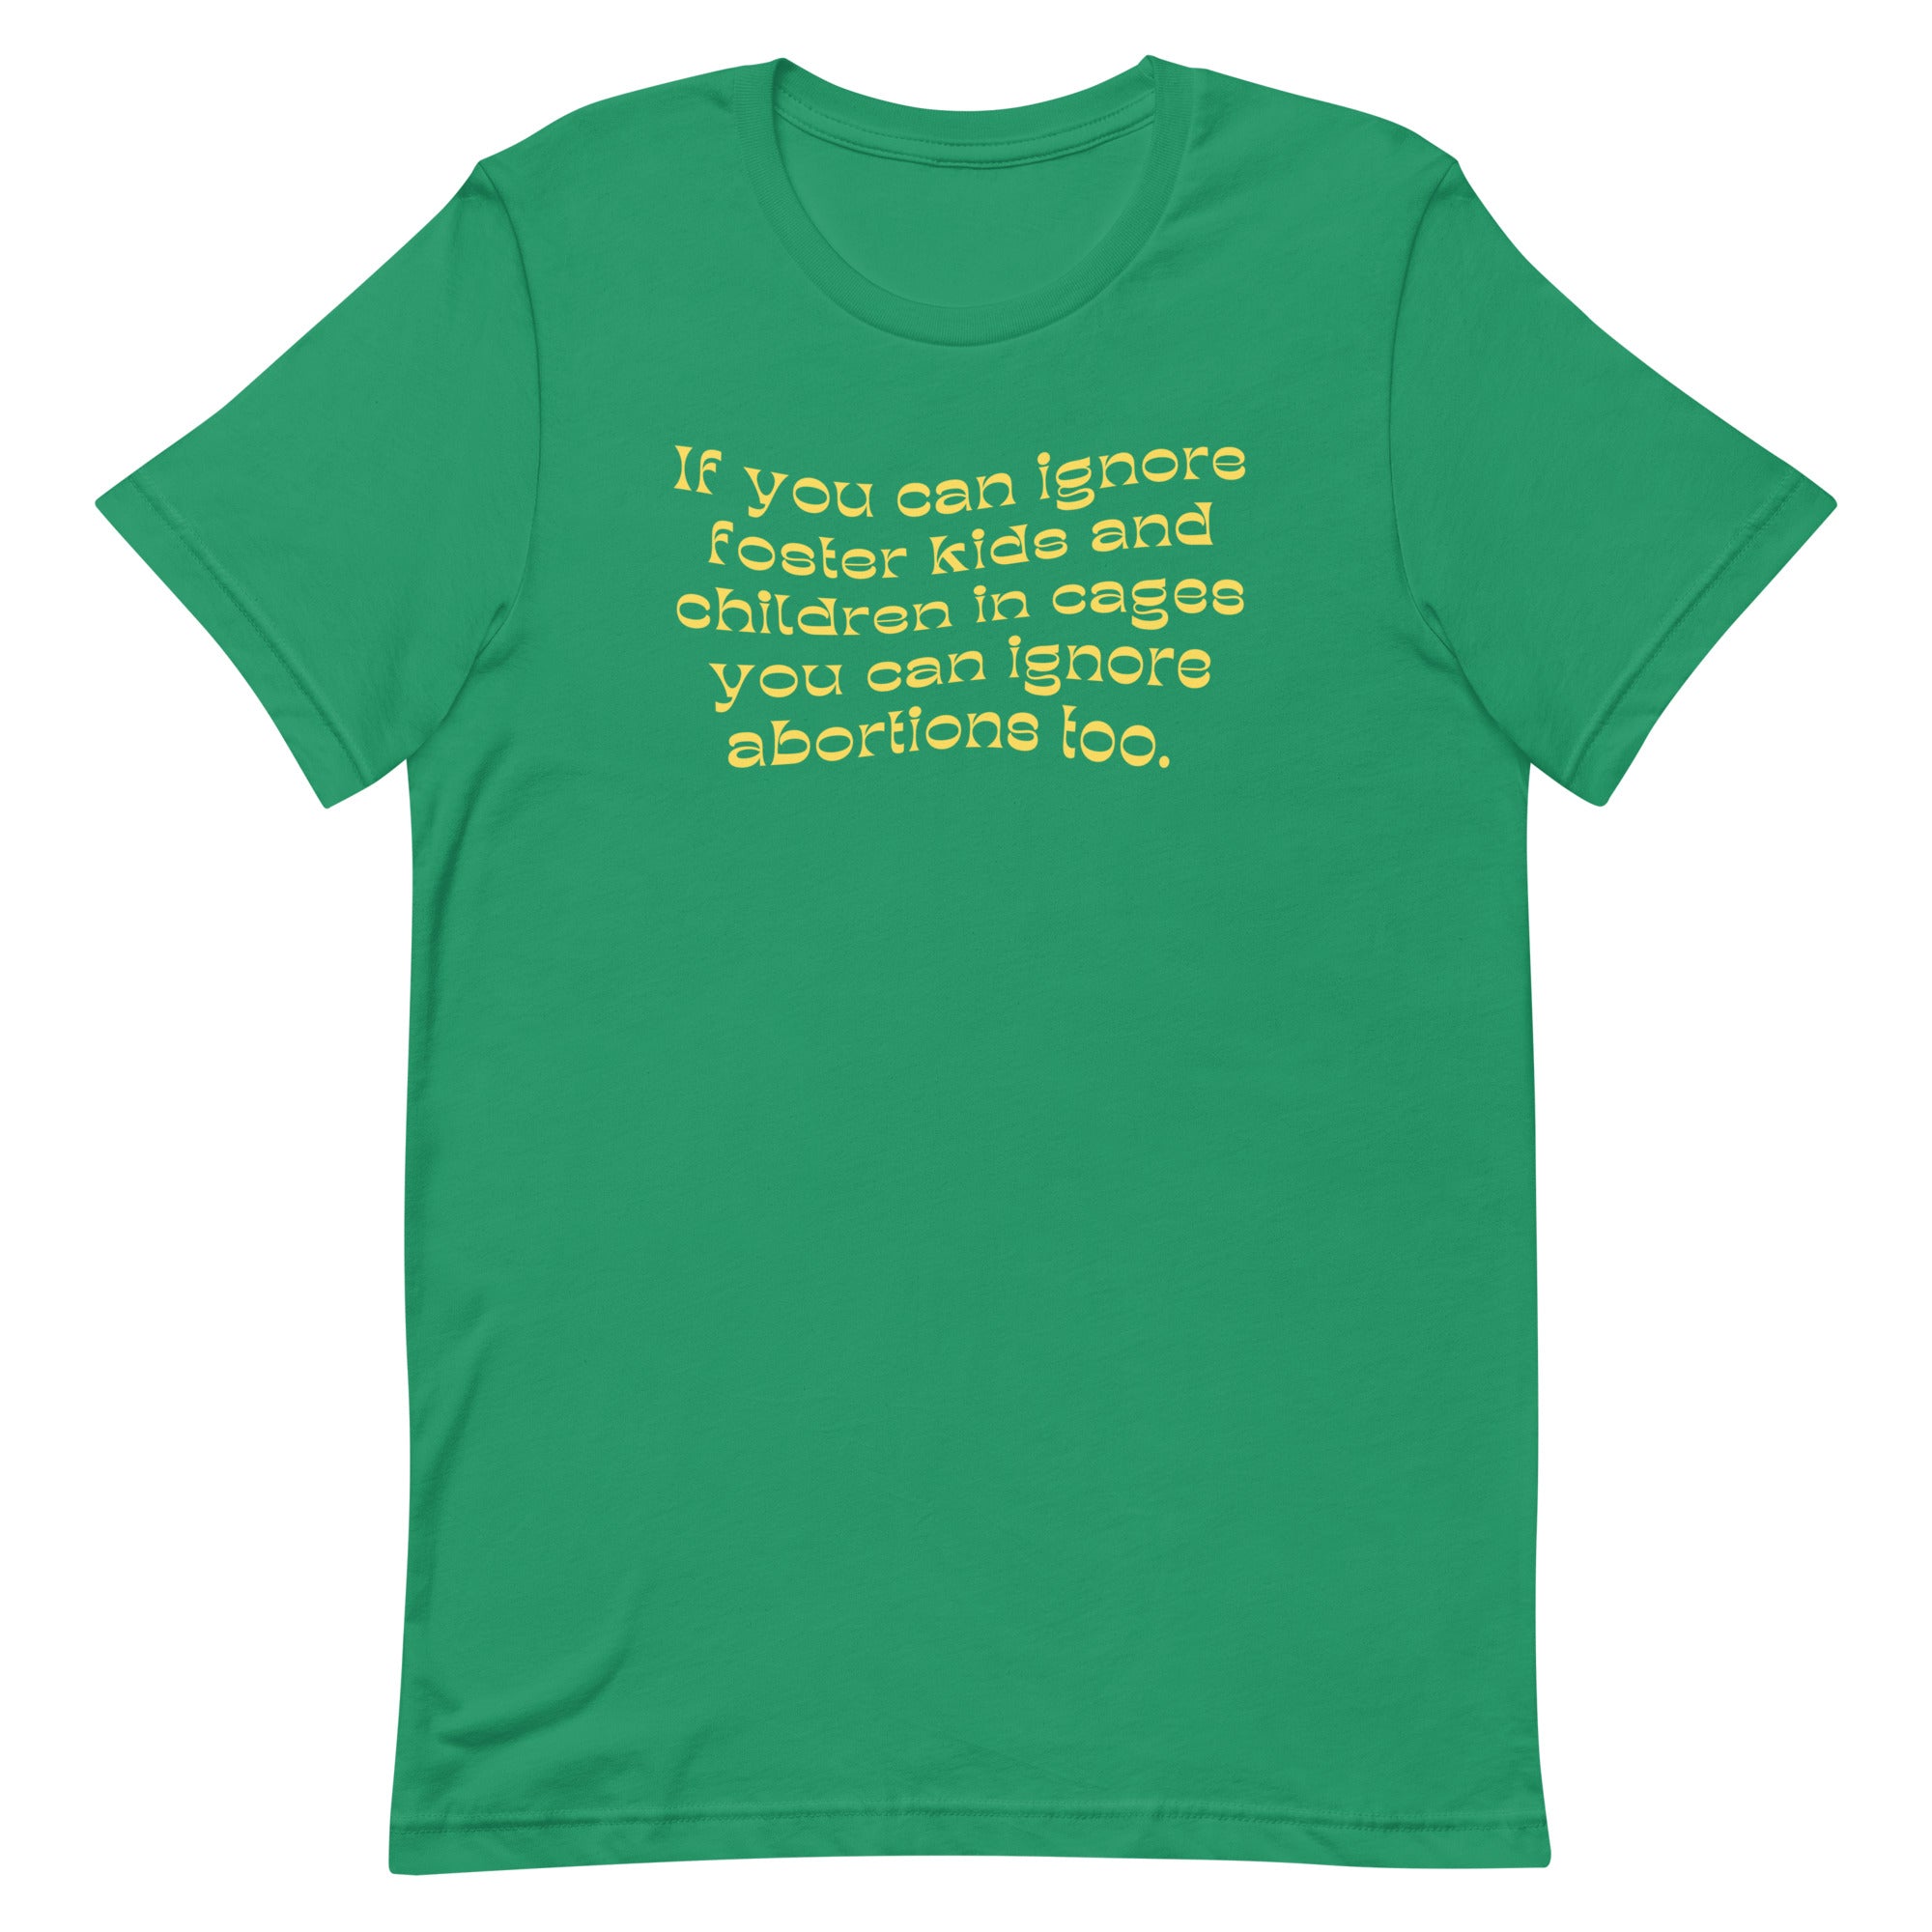 You Can Ignore abortions too Feminist Unisex t-shirt - Shop Women’s Rights T-Shirts - Feminist Trash Store - Kelly Green